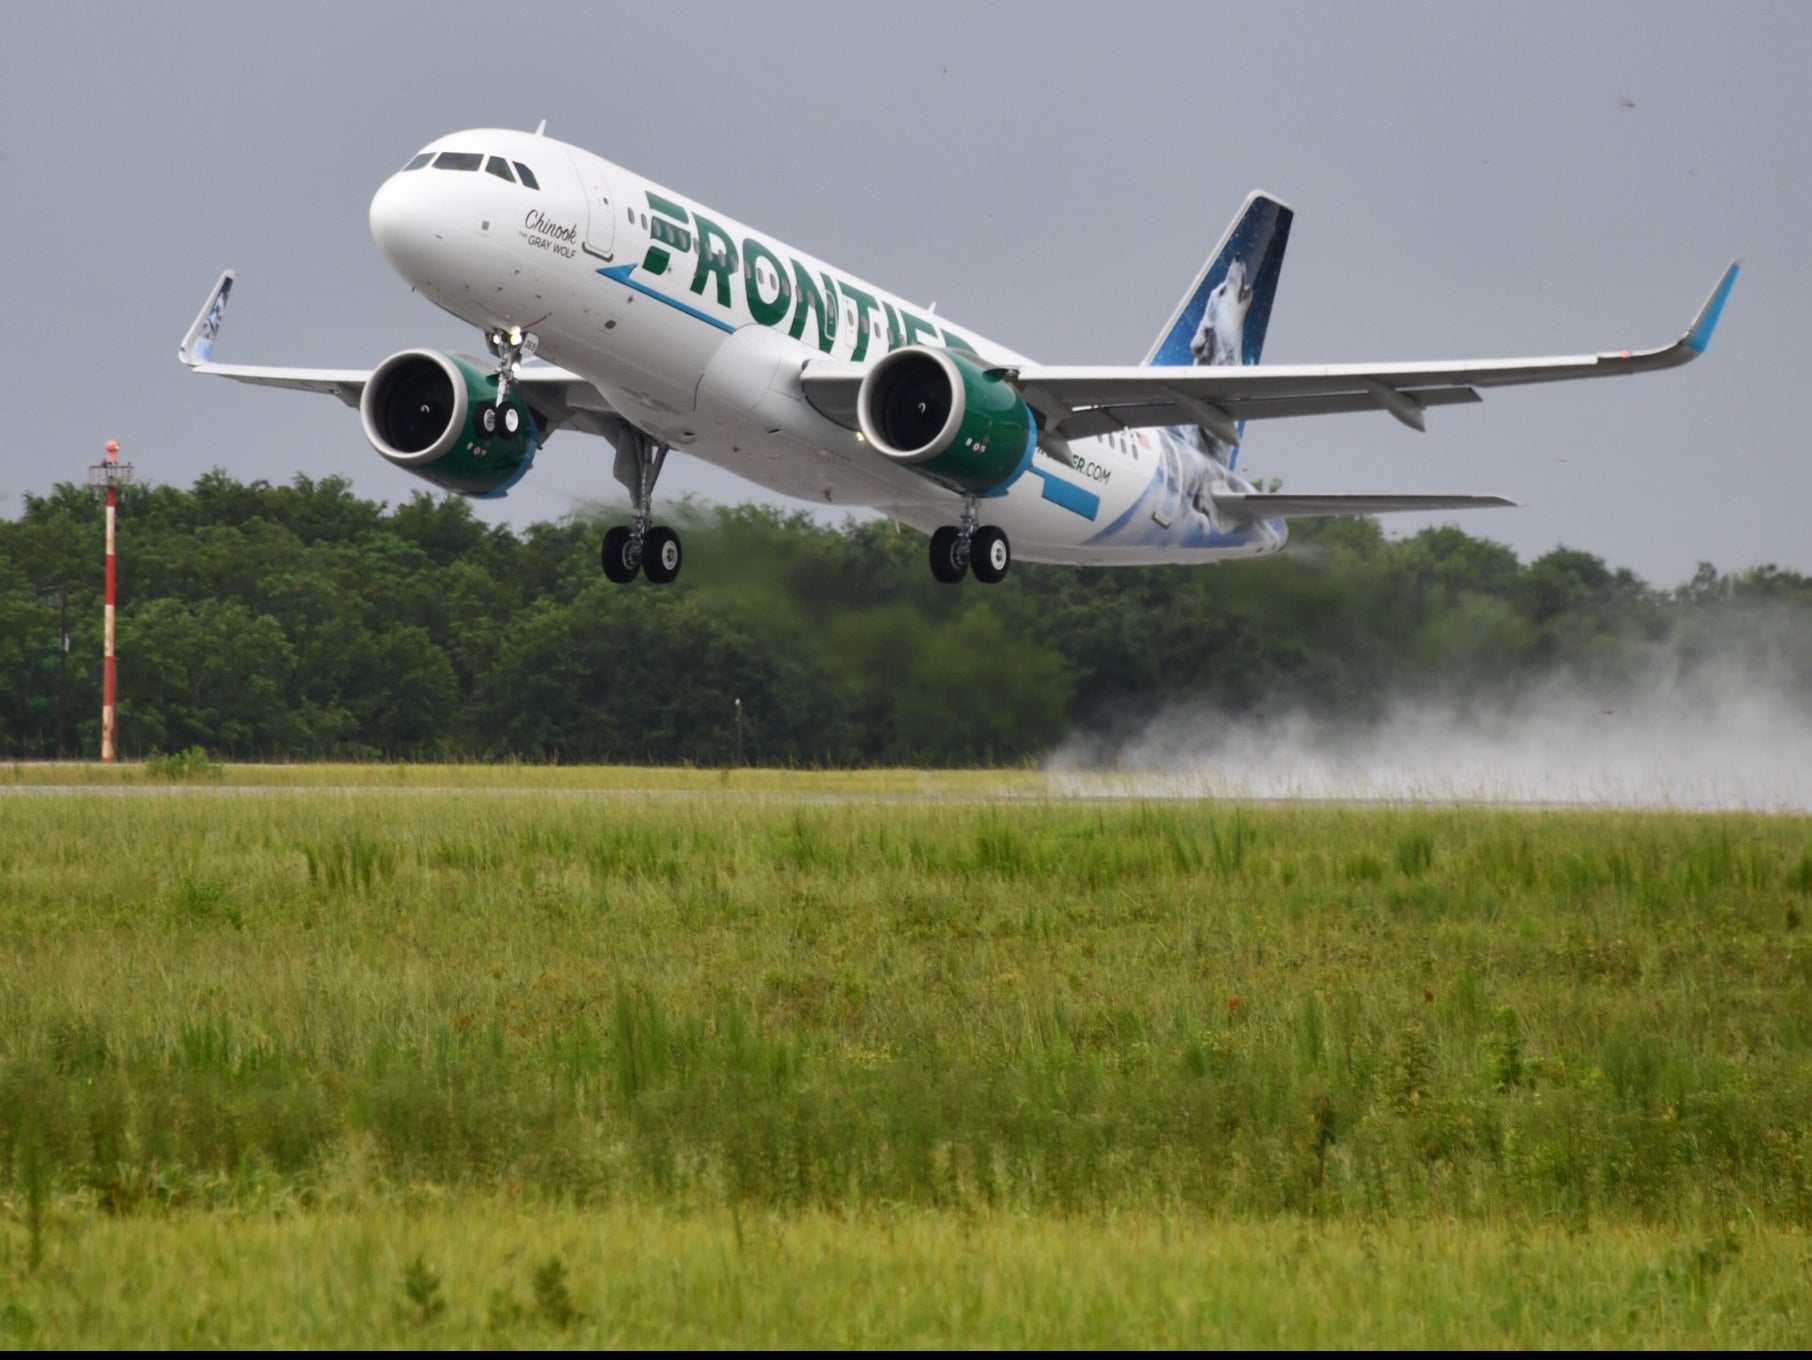 Rising star? Frontier Airlines has adopted some of the practices of Ryanair